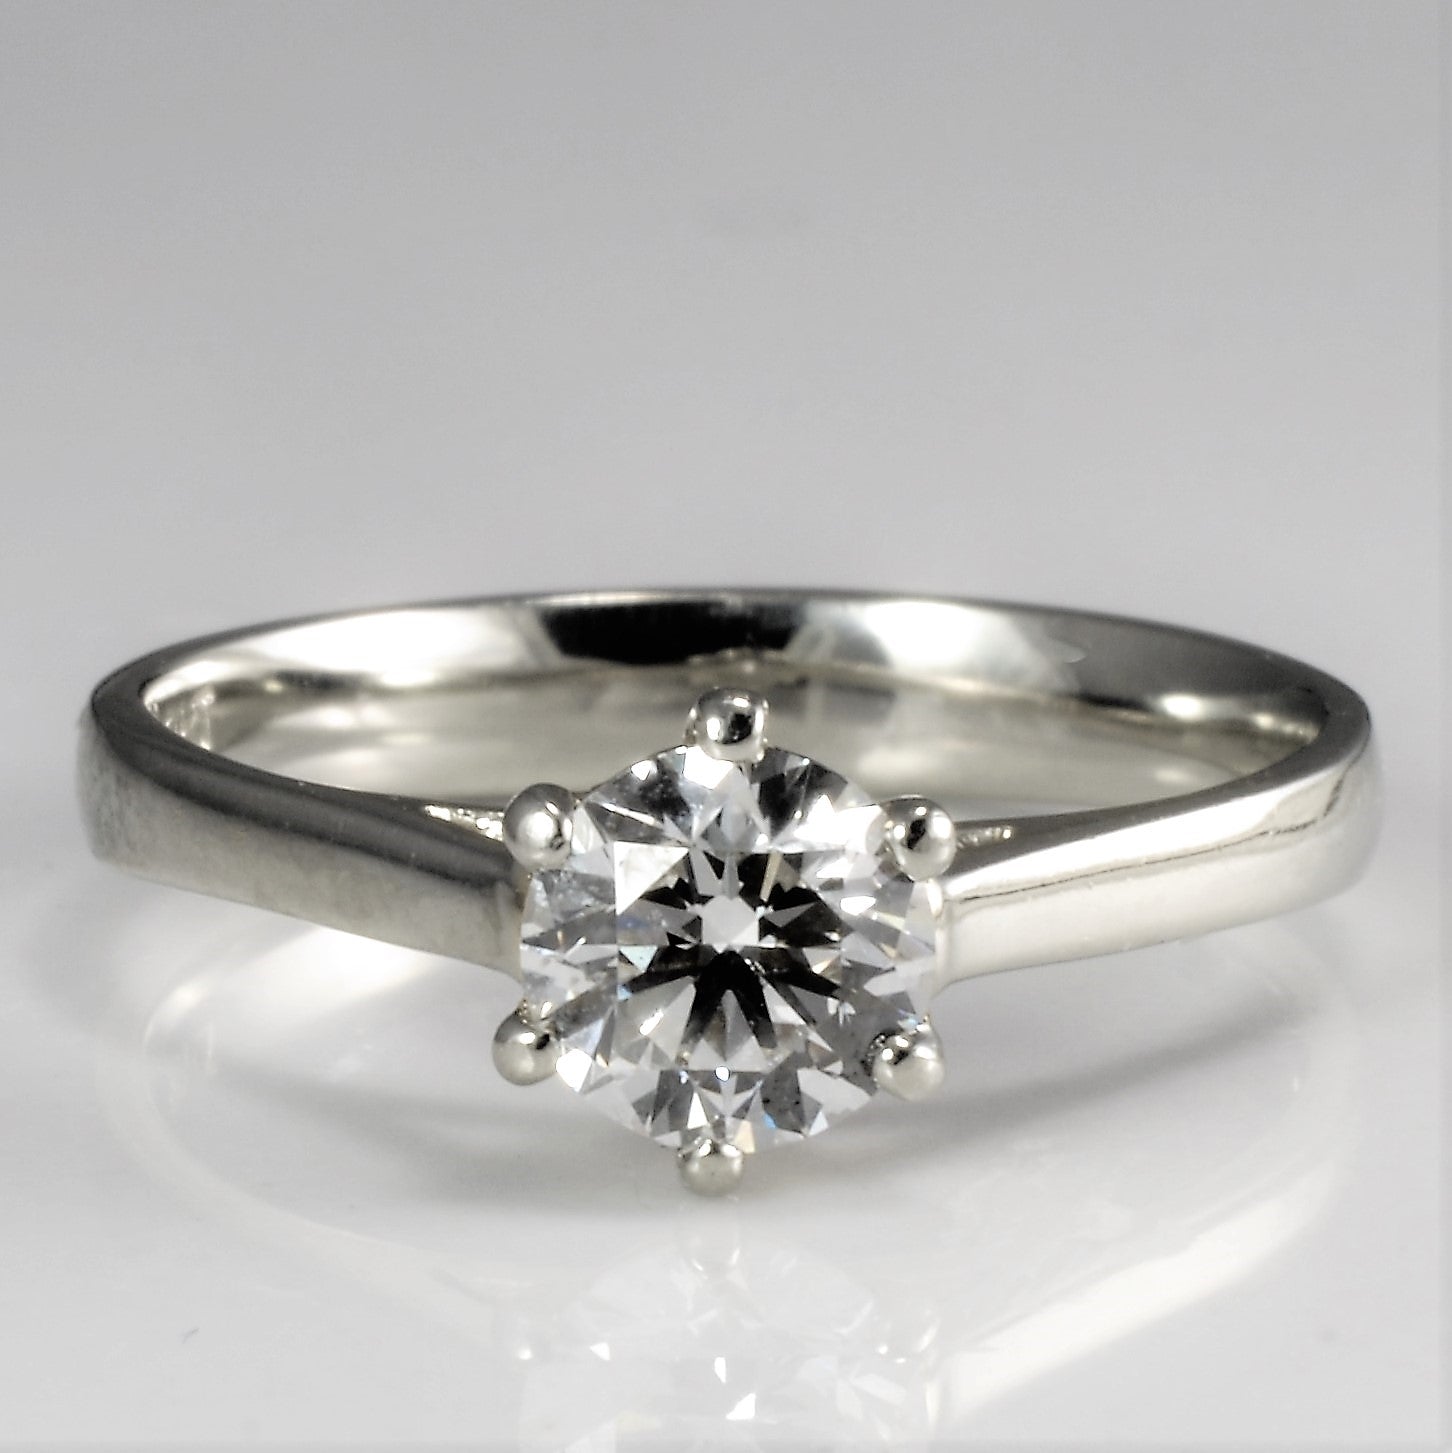 Six Prong Solitaire Diamond Engagement Ring | 0.64 ct, SZ 6 |